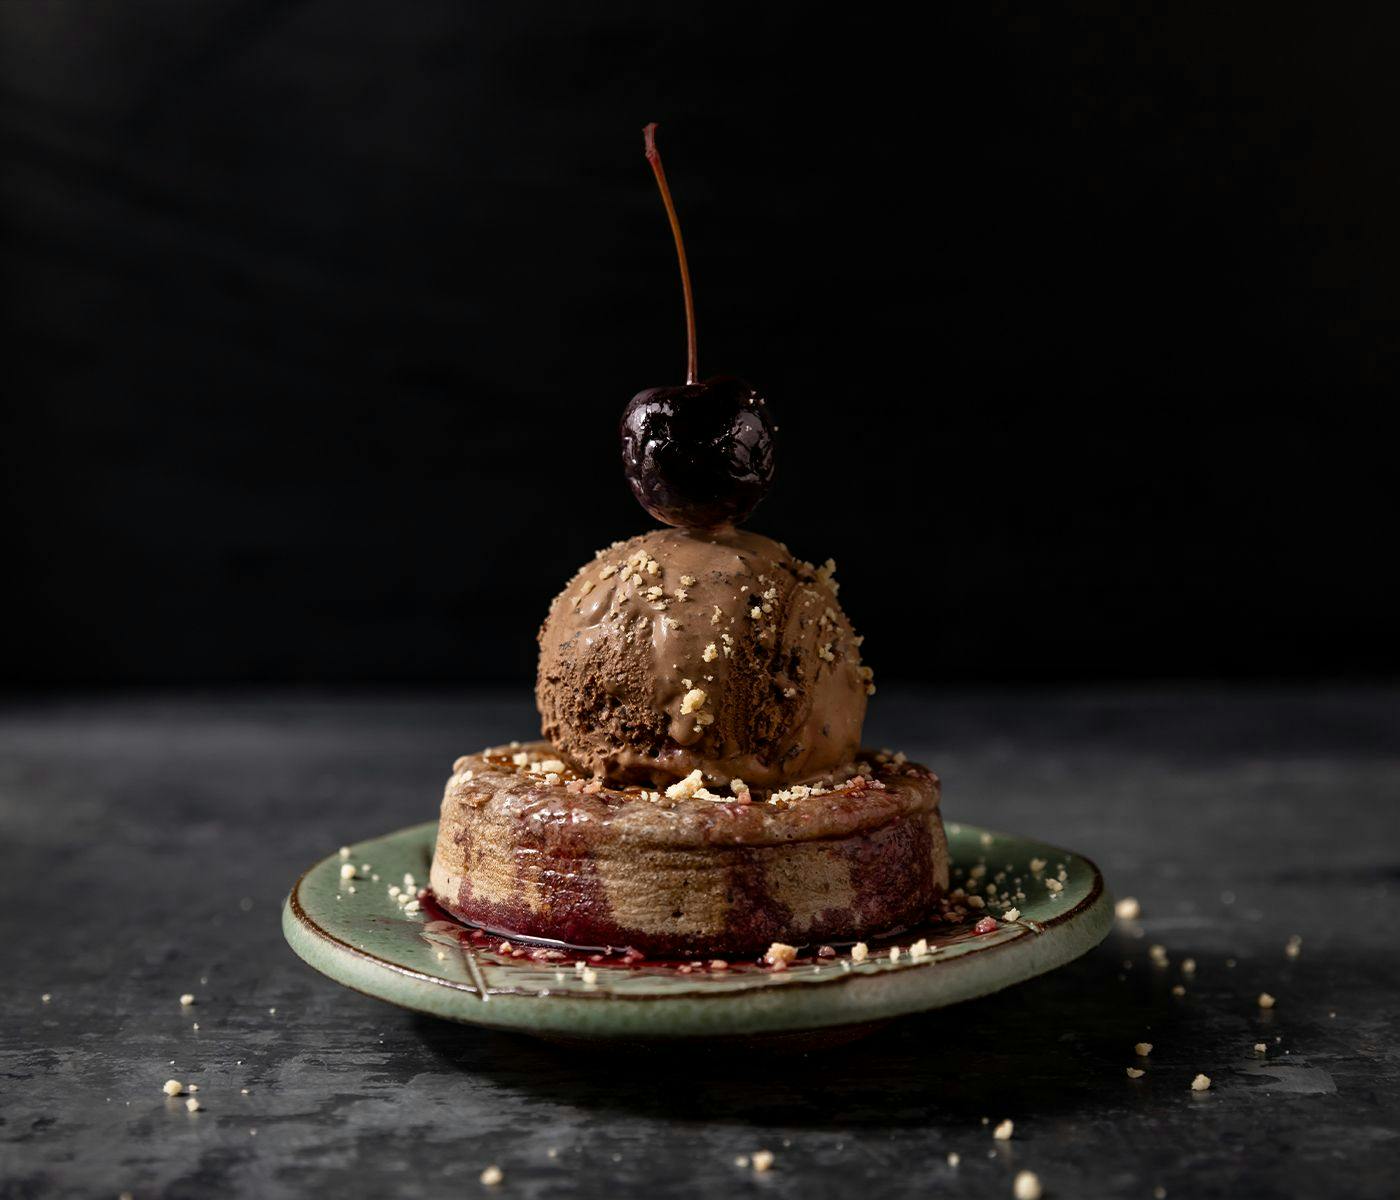 A crumpet topped with chocolate ice cream, and a dark red cherry.